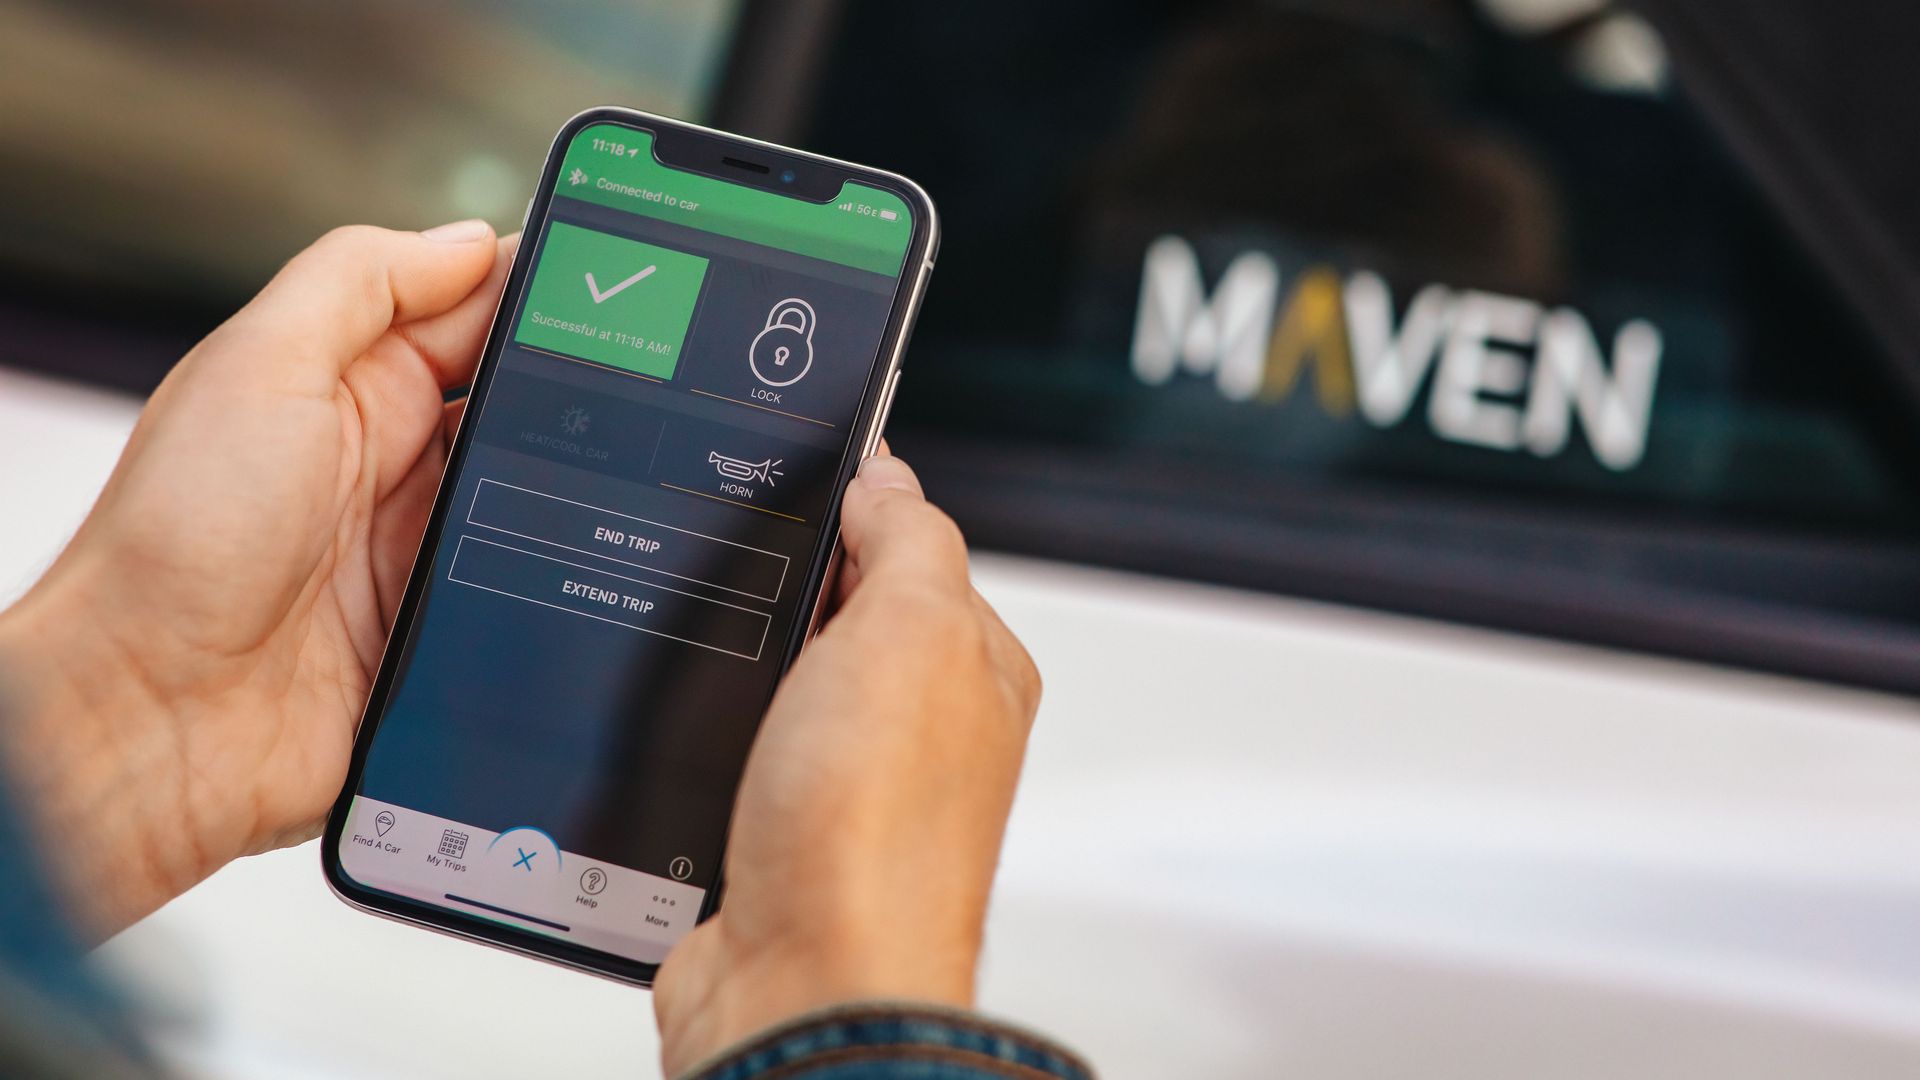 Image of mobile phone app for Maven car-sharing service